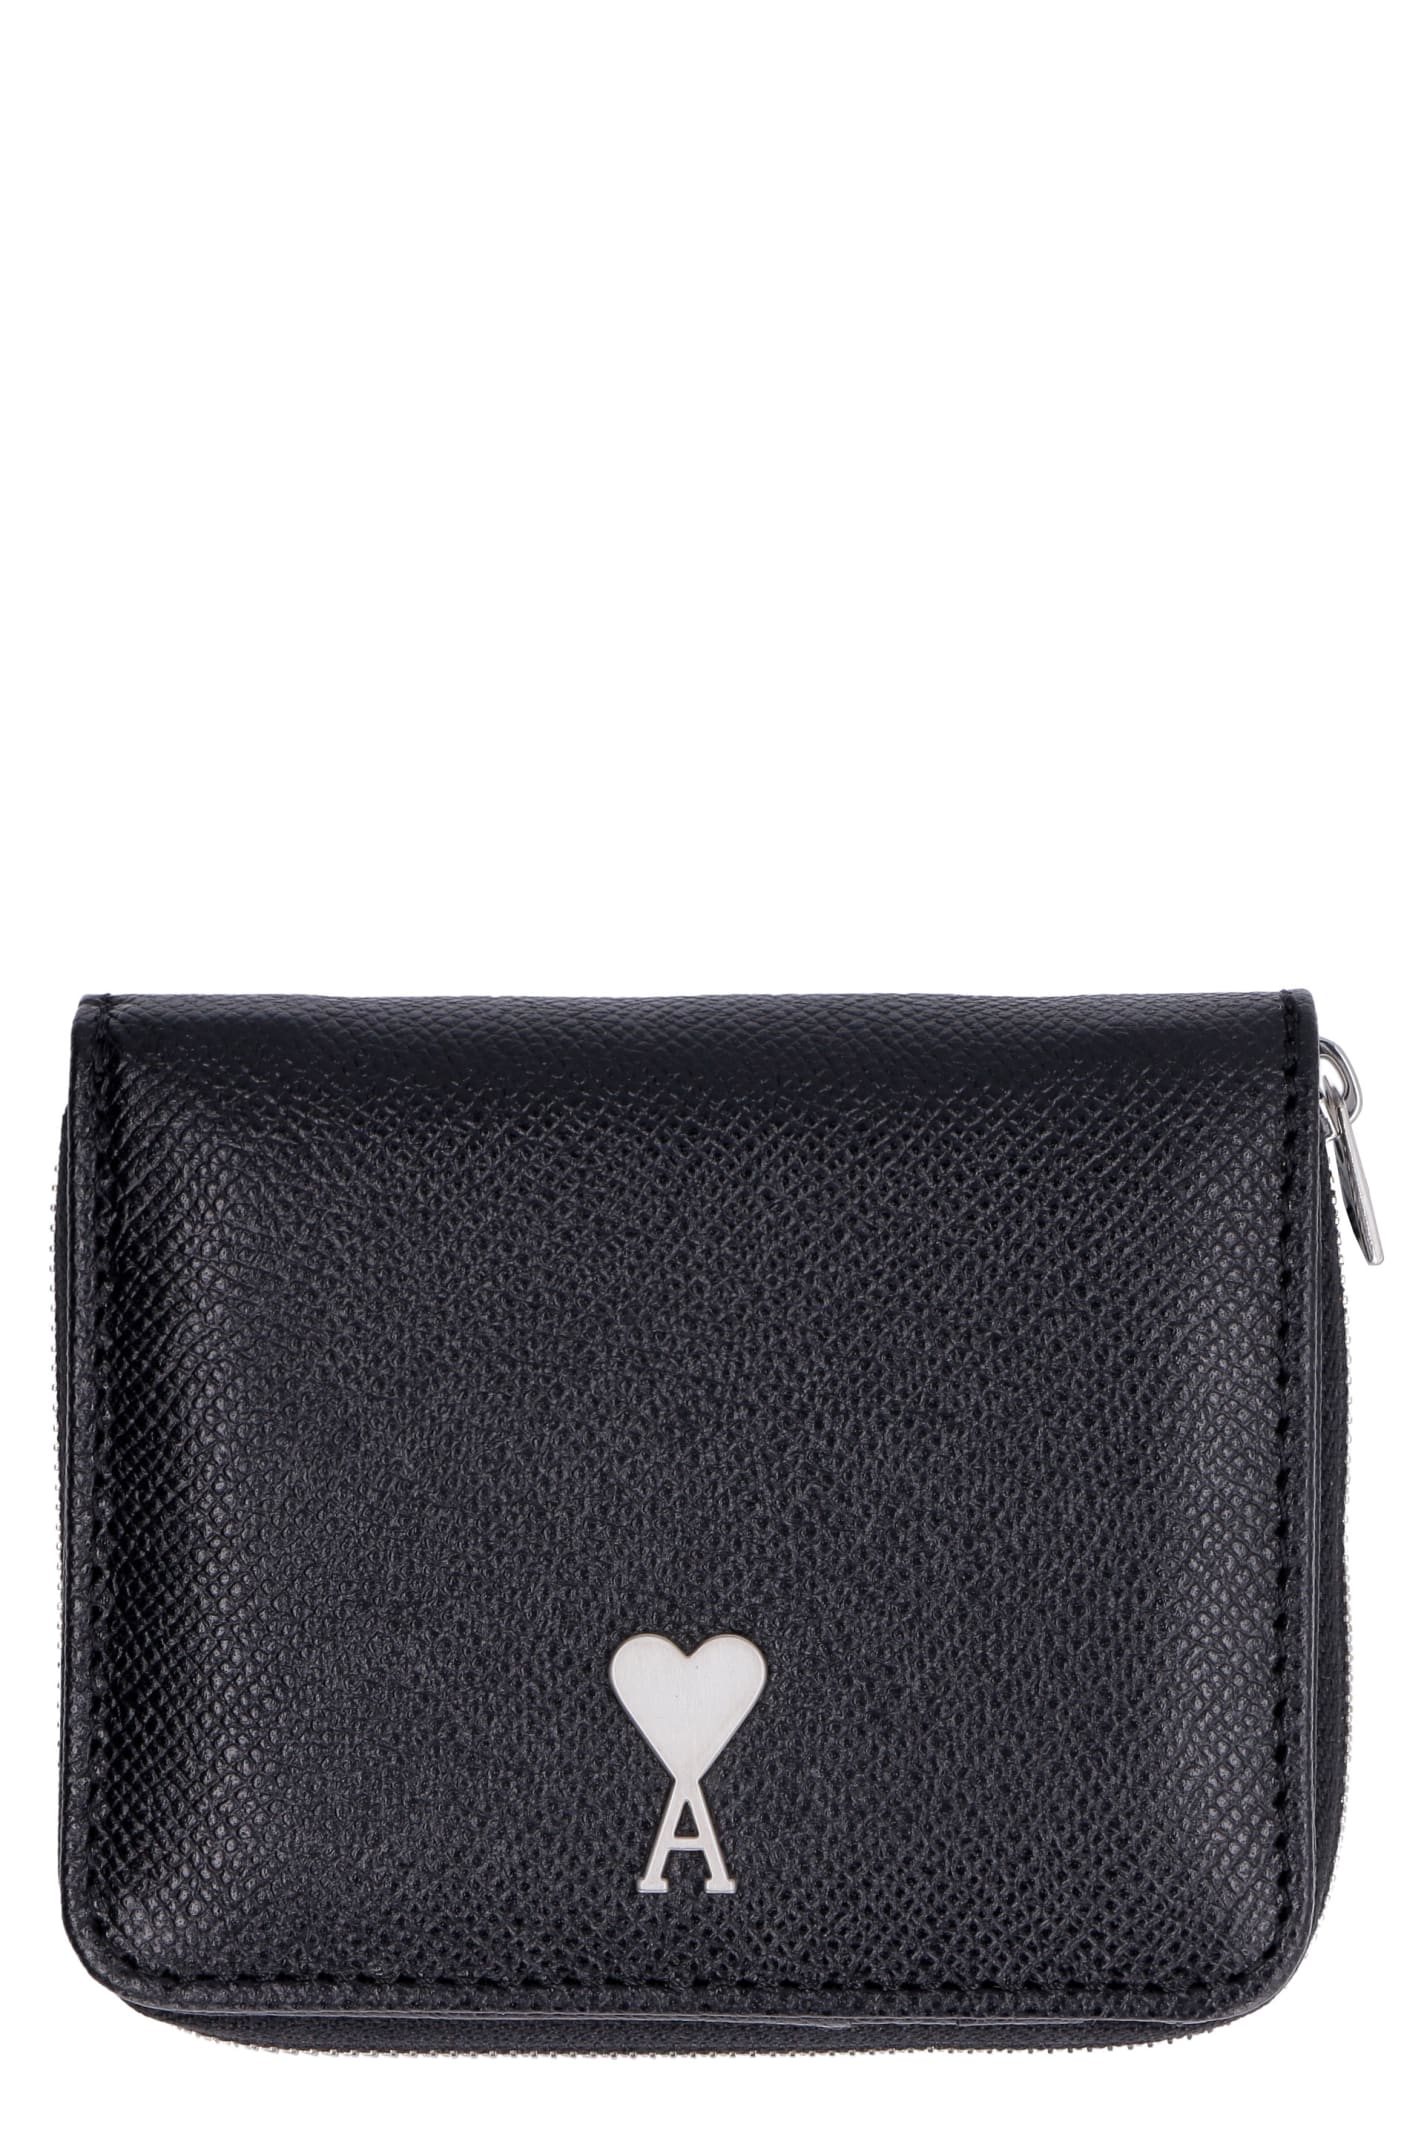 AMI ALEXANDRE MATTIUSSI SMALL LEATHER FLAP-OVER WALLET,11768064